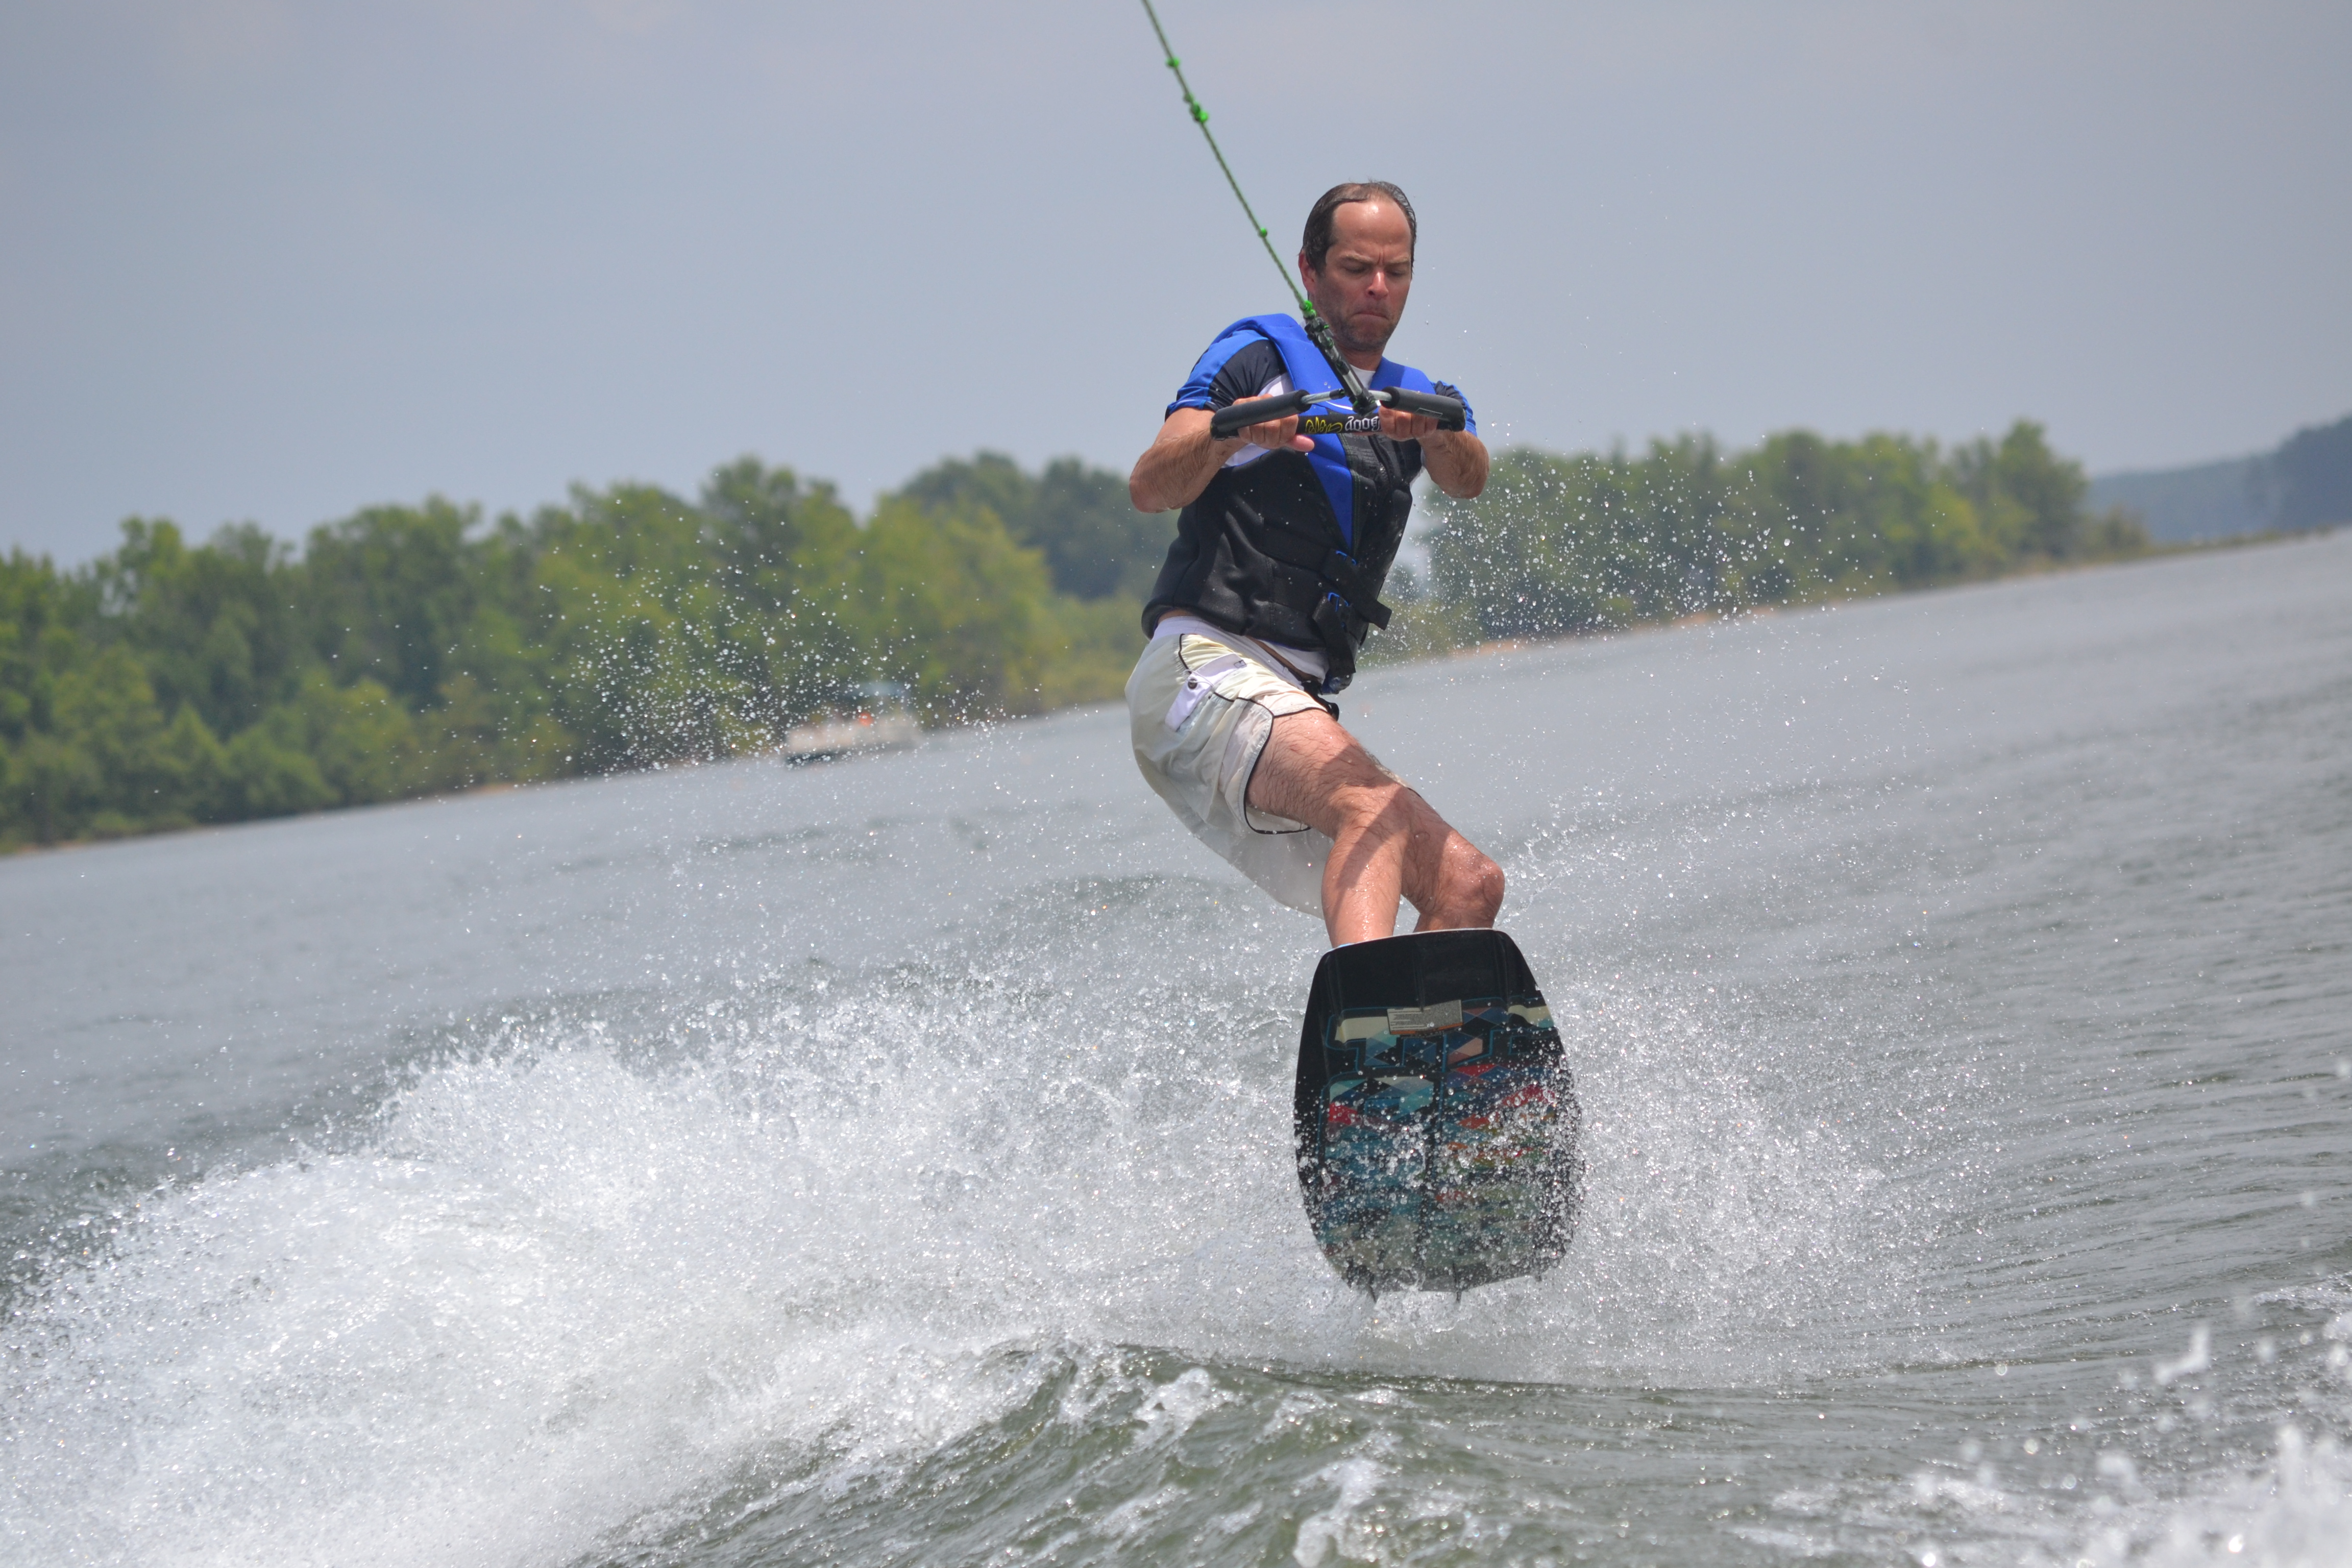 Great weekend on Kerr Lake, even dad got some time on his board!